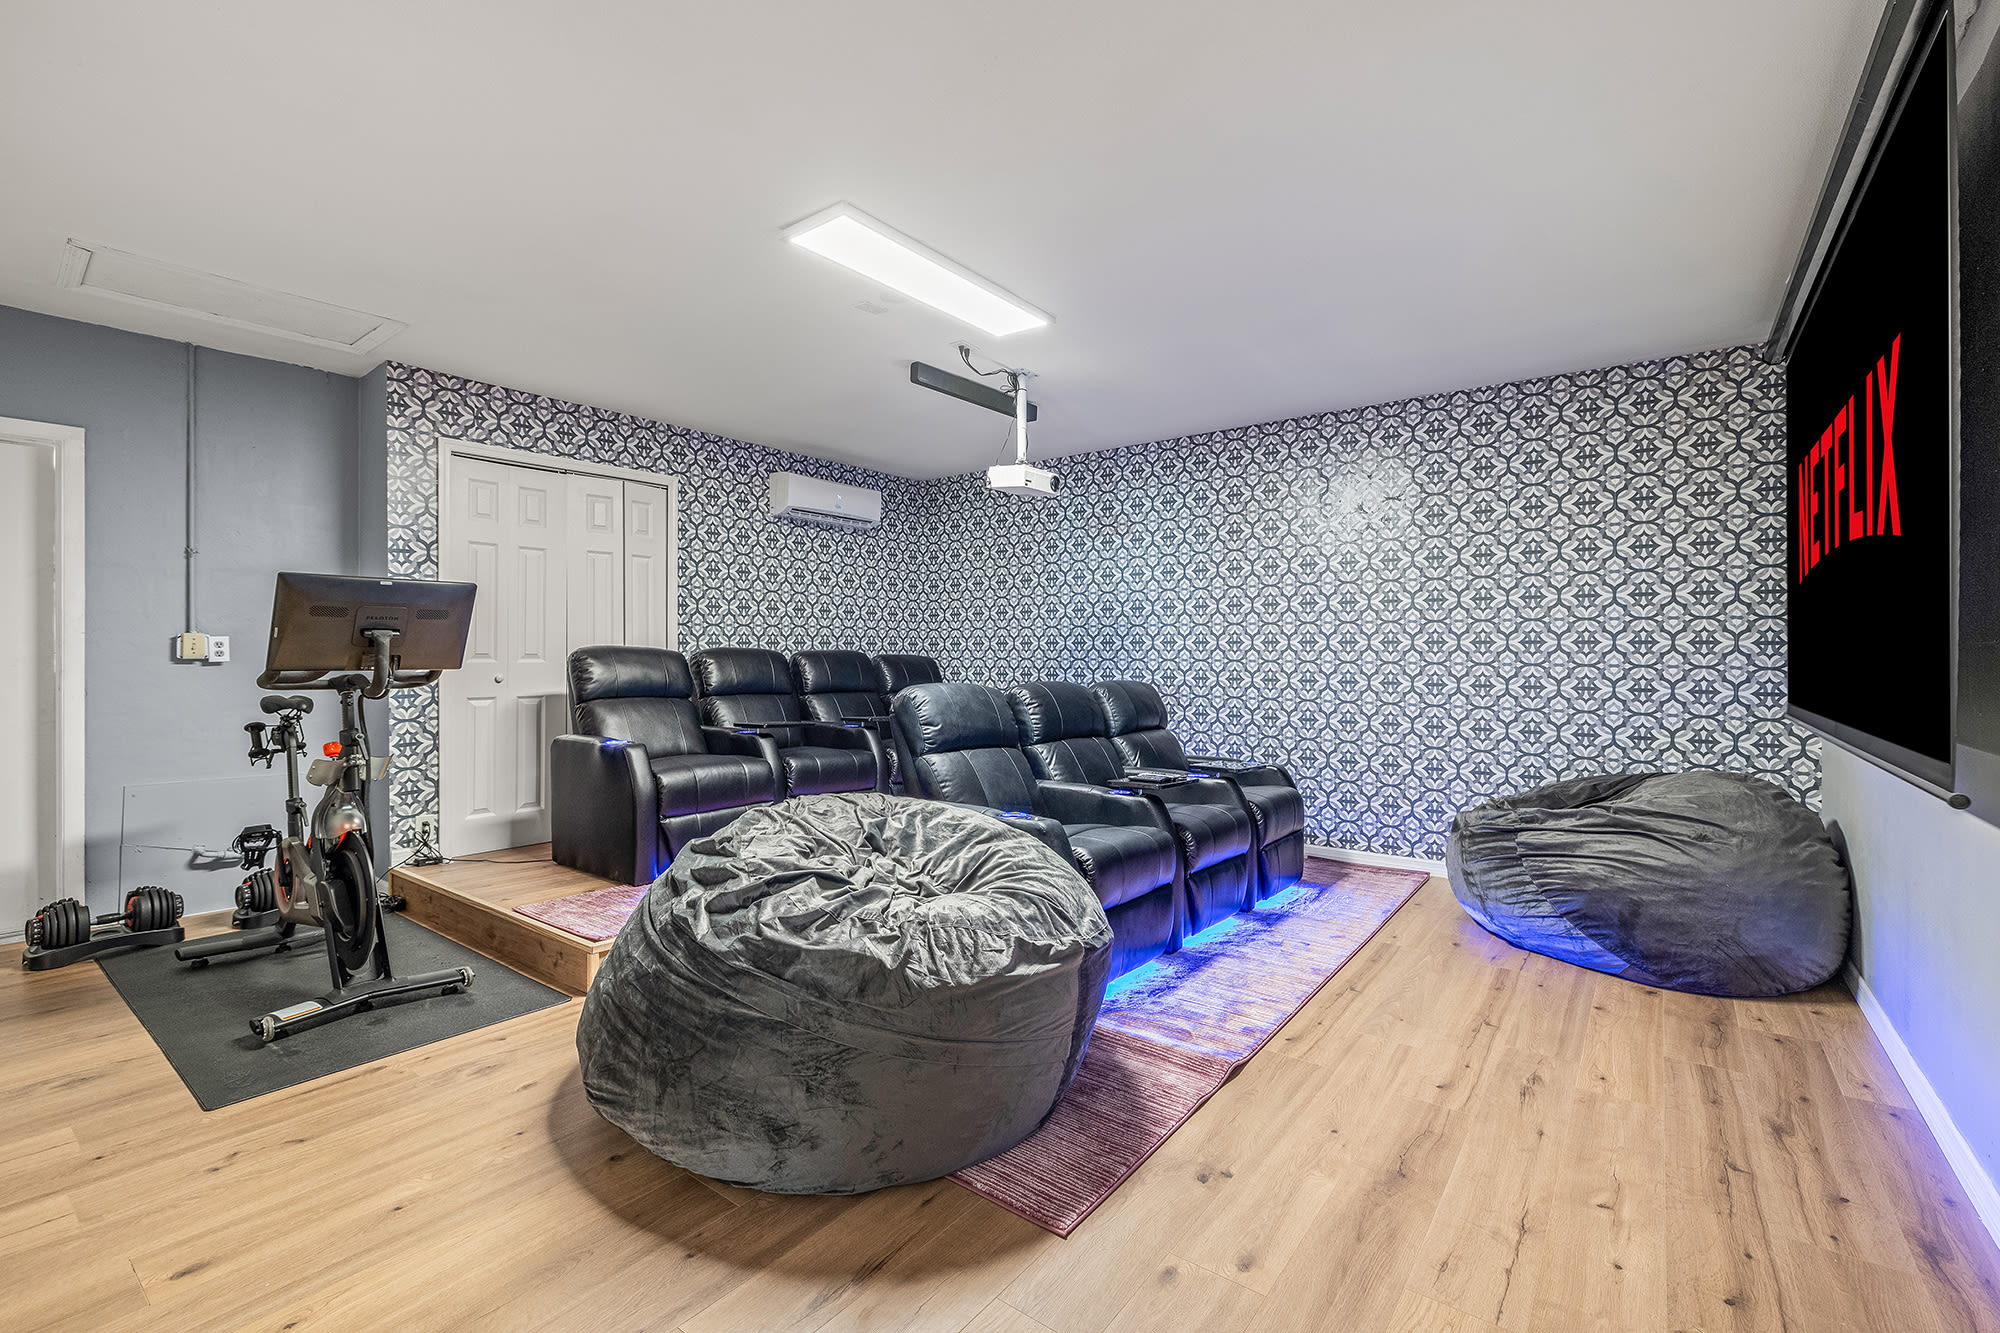 In-home movie theater- sit back relax in the luxury reclining seats or a bean bag- This room also features a Peloton, adjustable weights, and yoga mat!